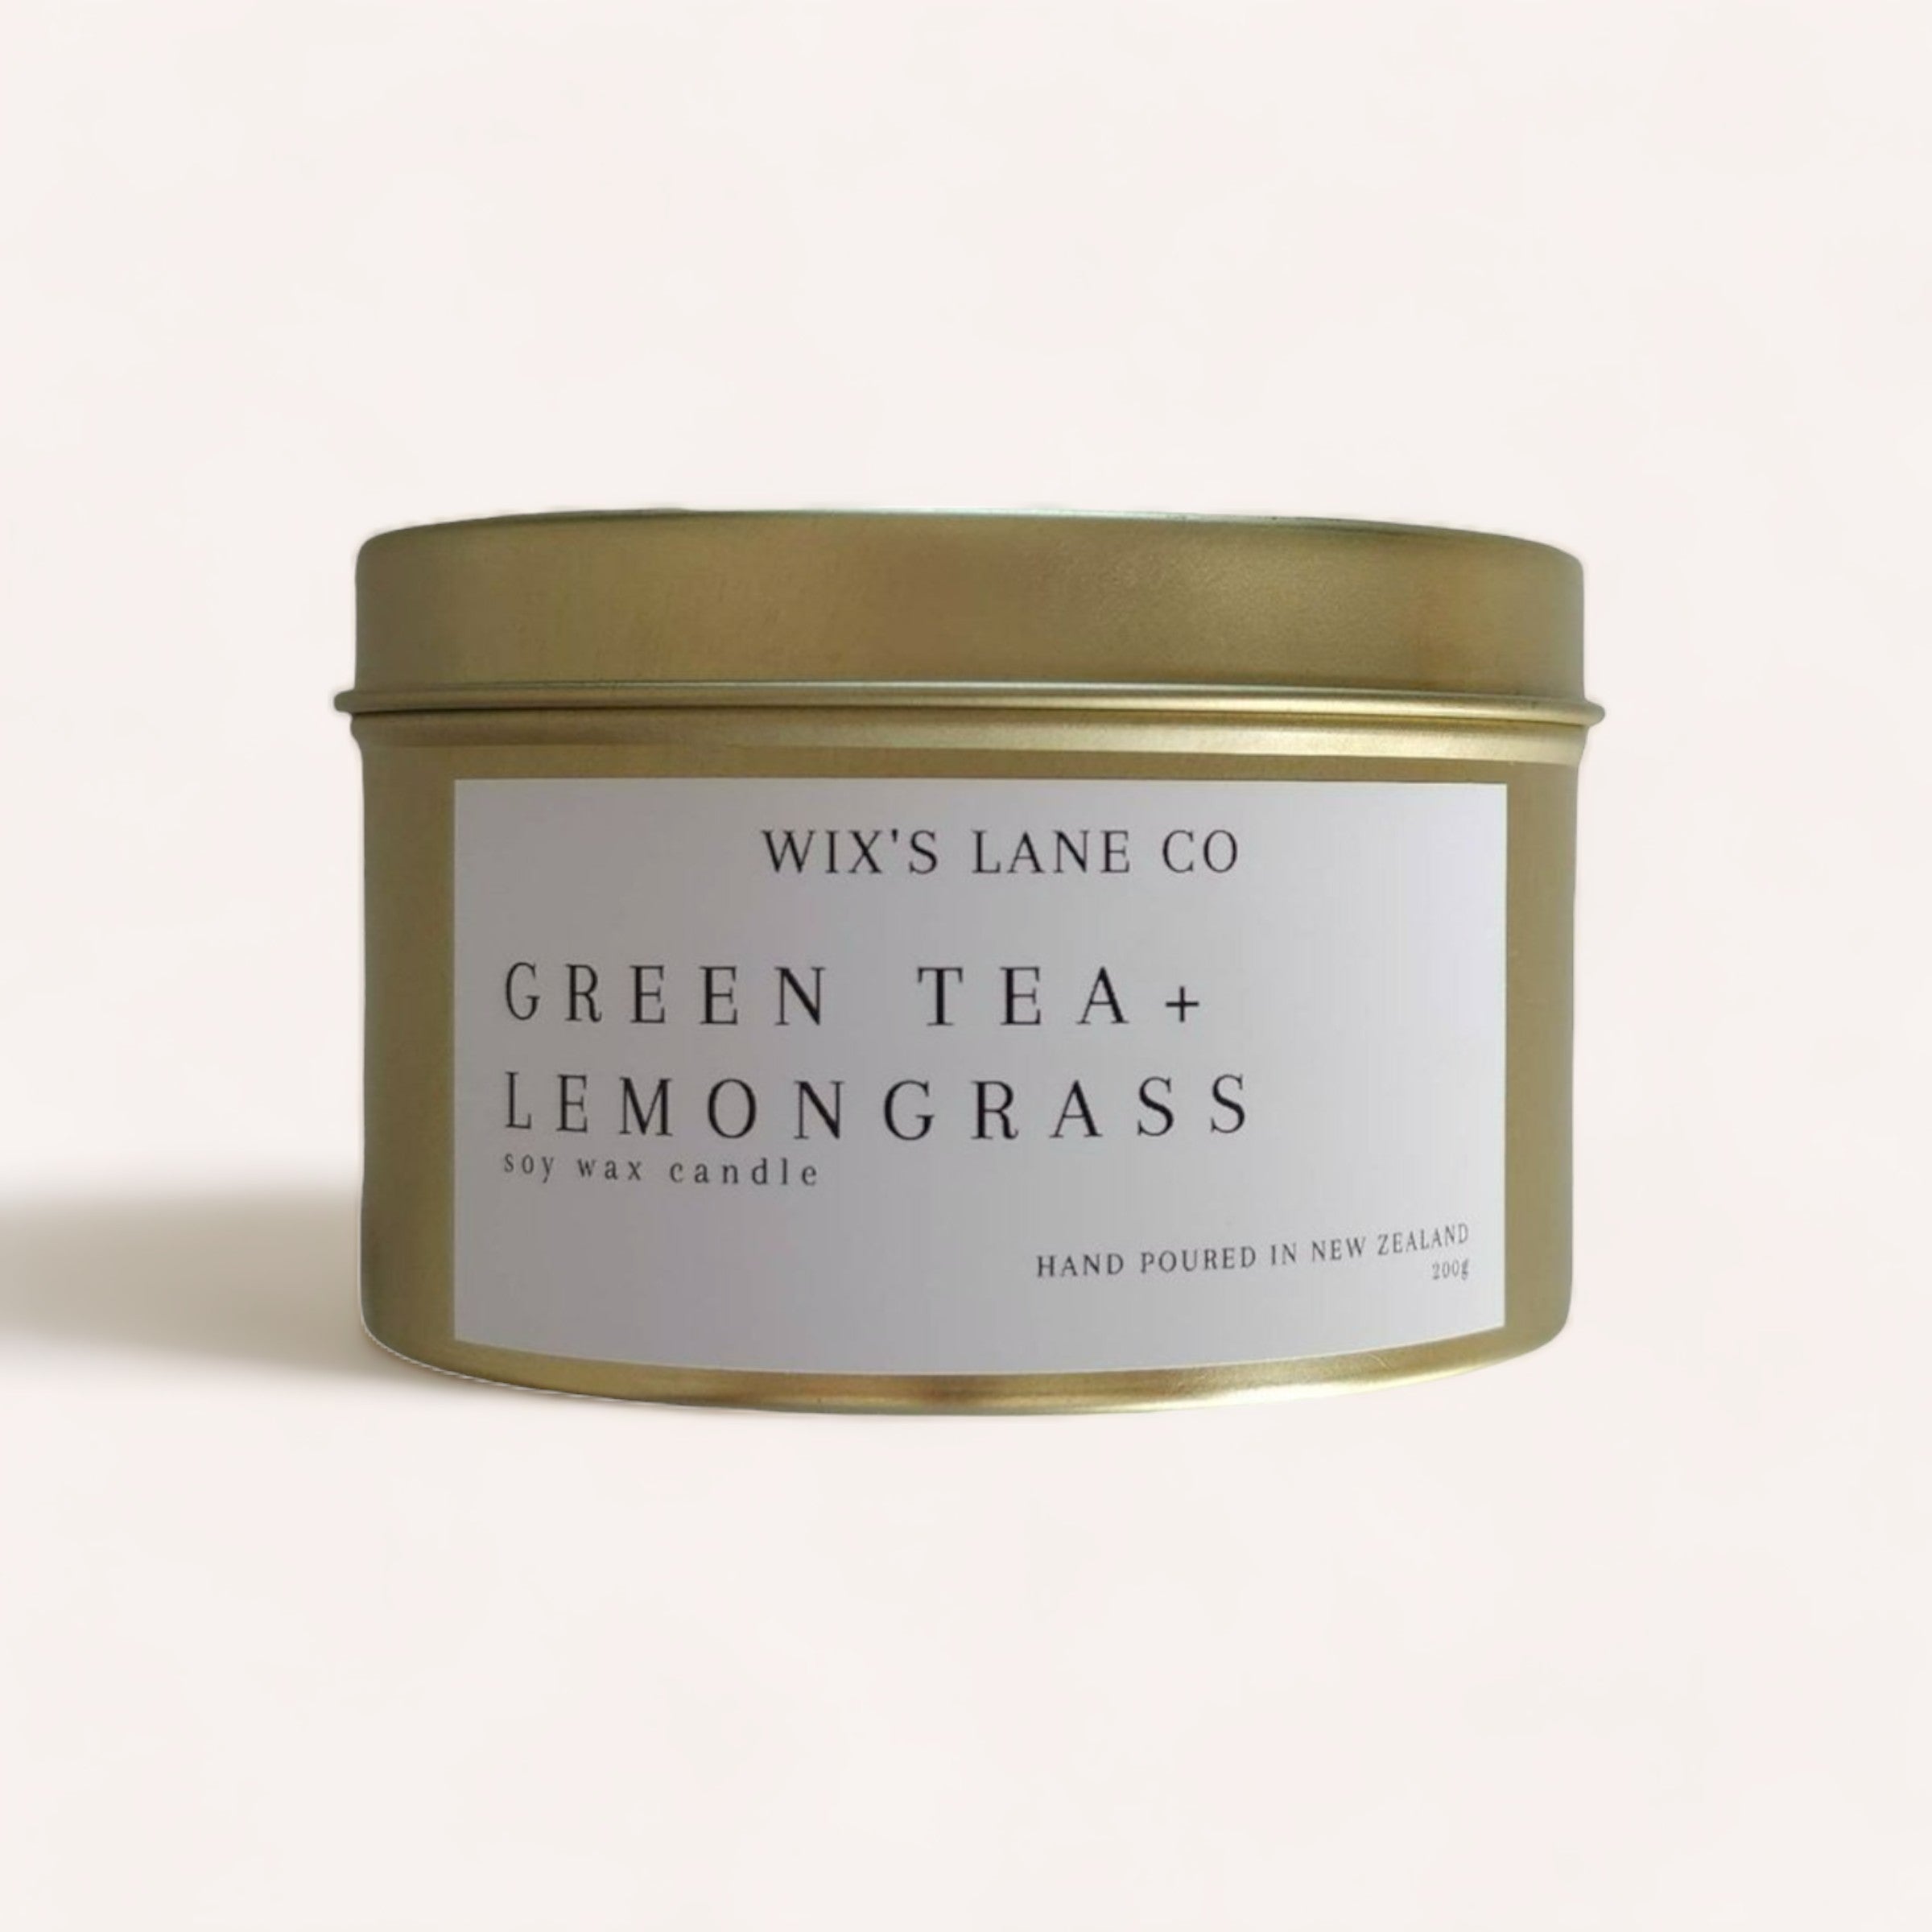 A minimalist-designed Green Tea + Lemongrass Candle labeled "green tea + lemongrass scent, soy wax candle, Product of New Zealand" by Wix's Lane Co, presented against a neutral background.